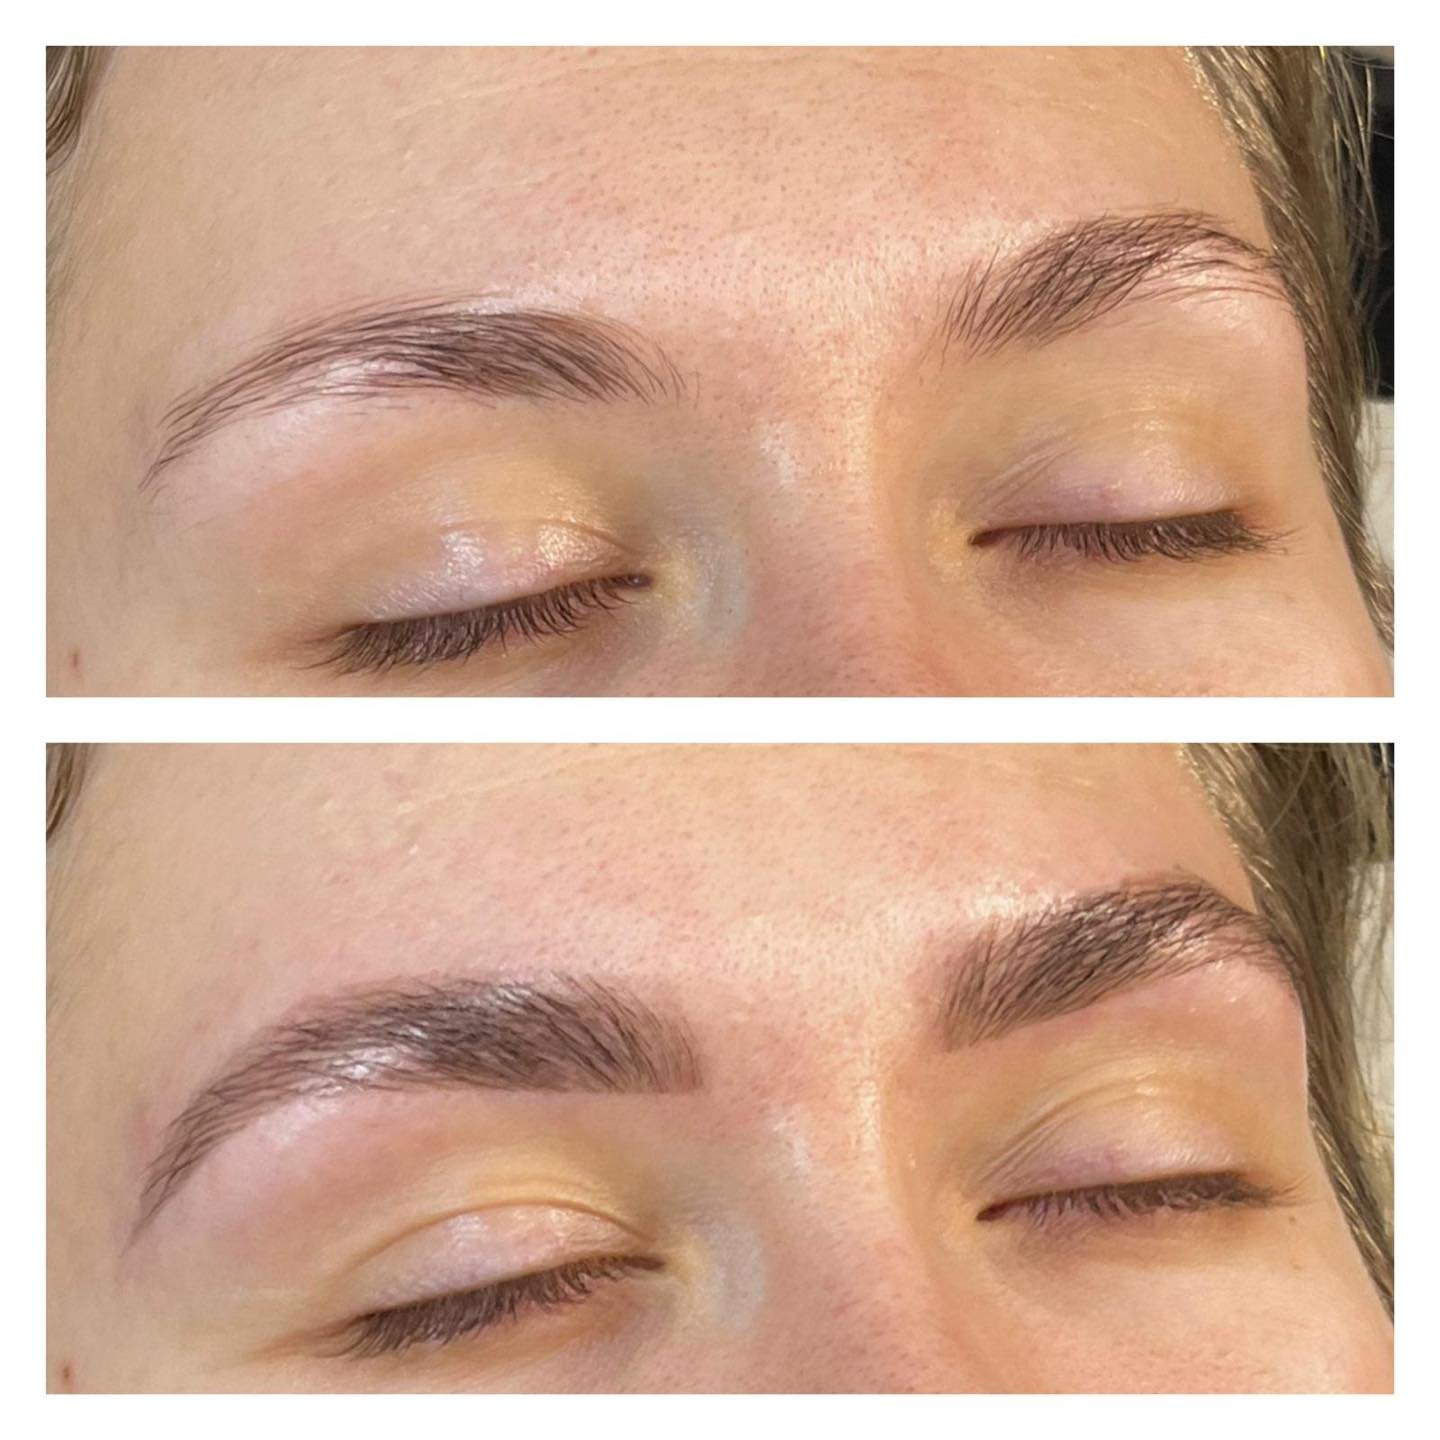 Introducing HD brows by Amy ❤️

Here&rsquo;s the process:

Consultation: Tell me what you like? What you don&rsquo;t like? What you want to achieve? Let me give you guidance to help you get closer to the desired result! 

Tint: want fuller brows but 